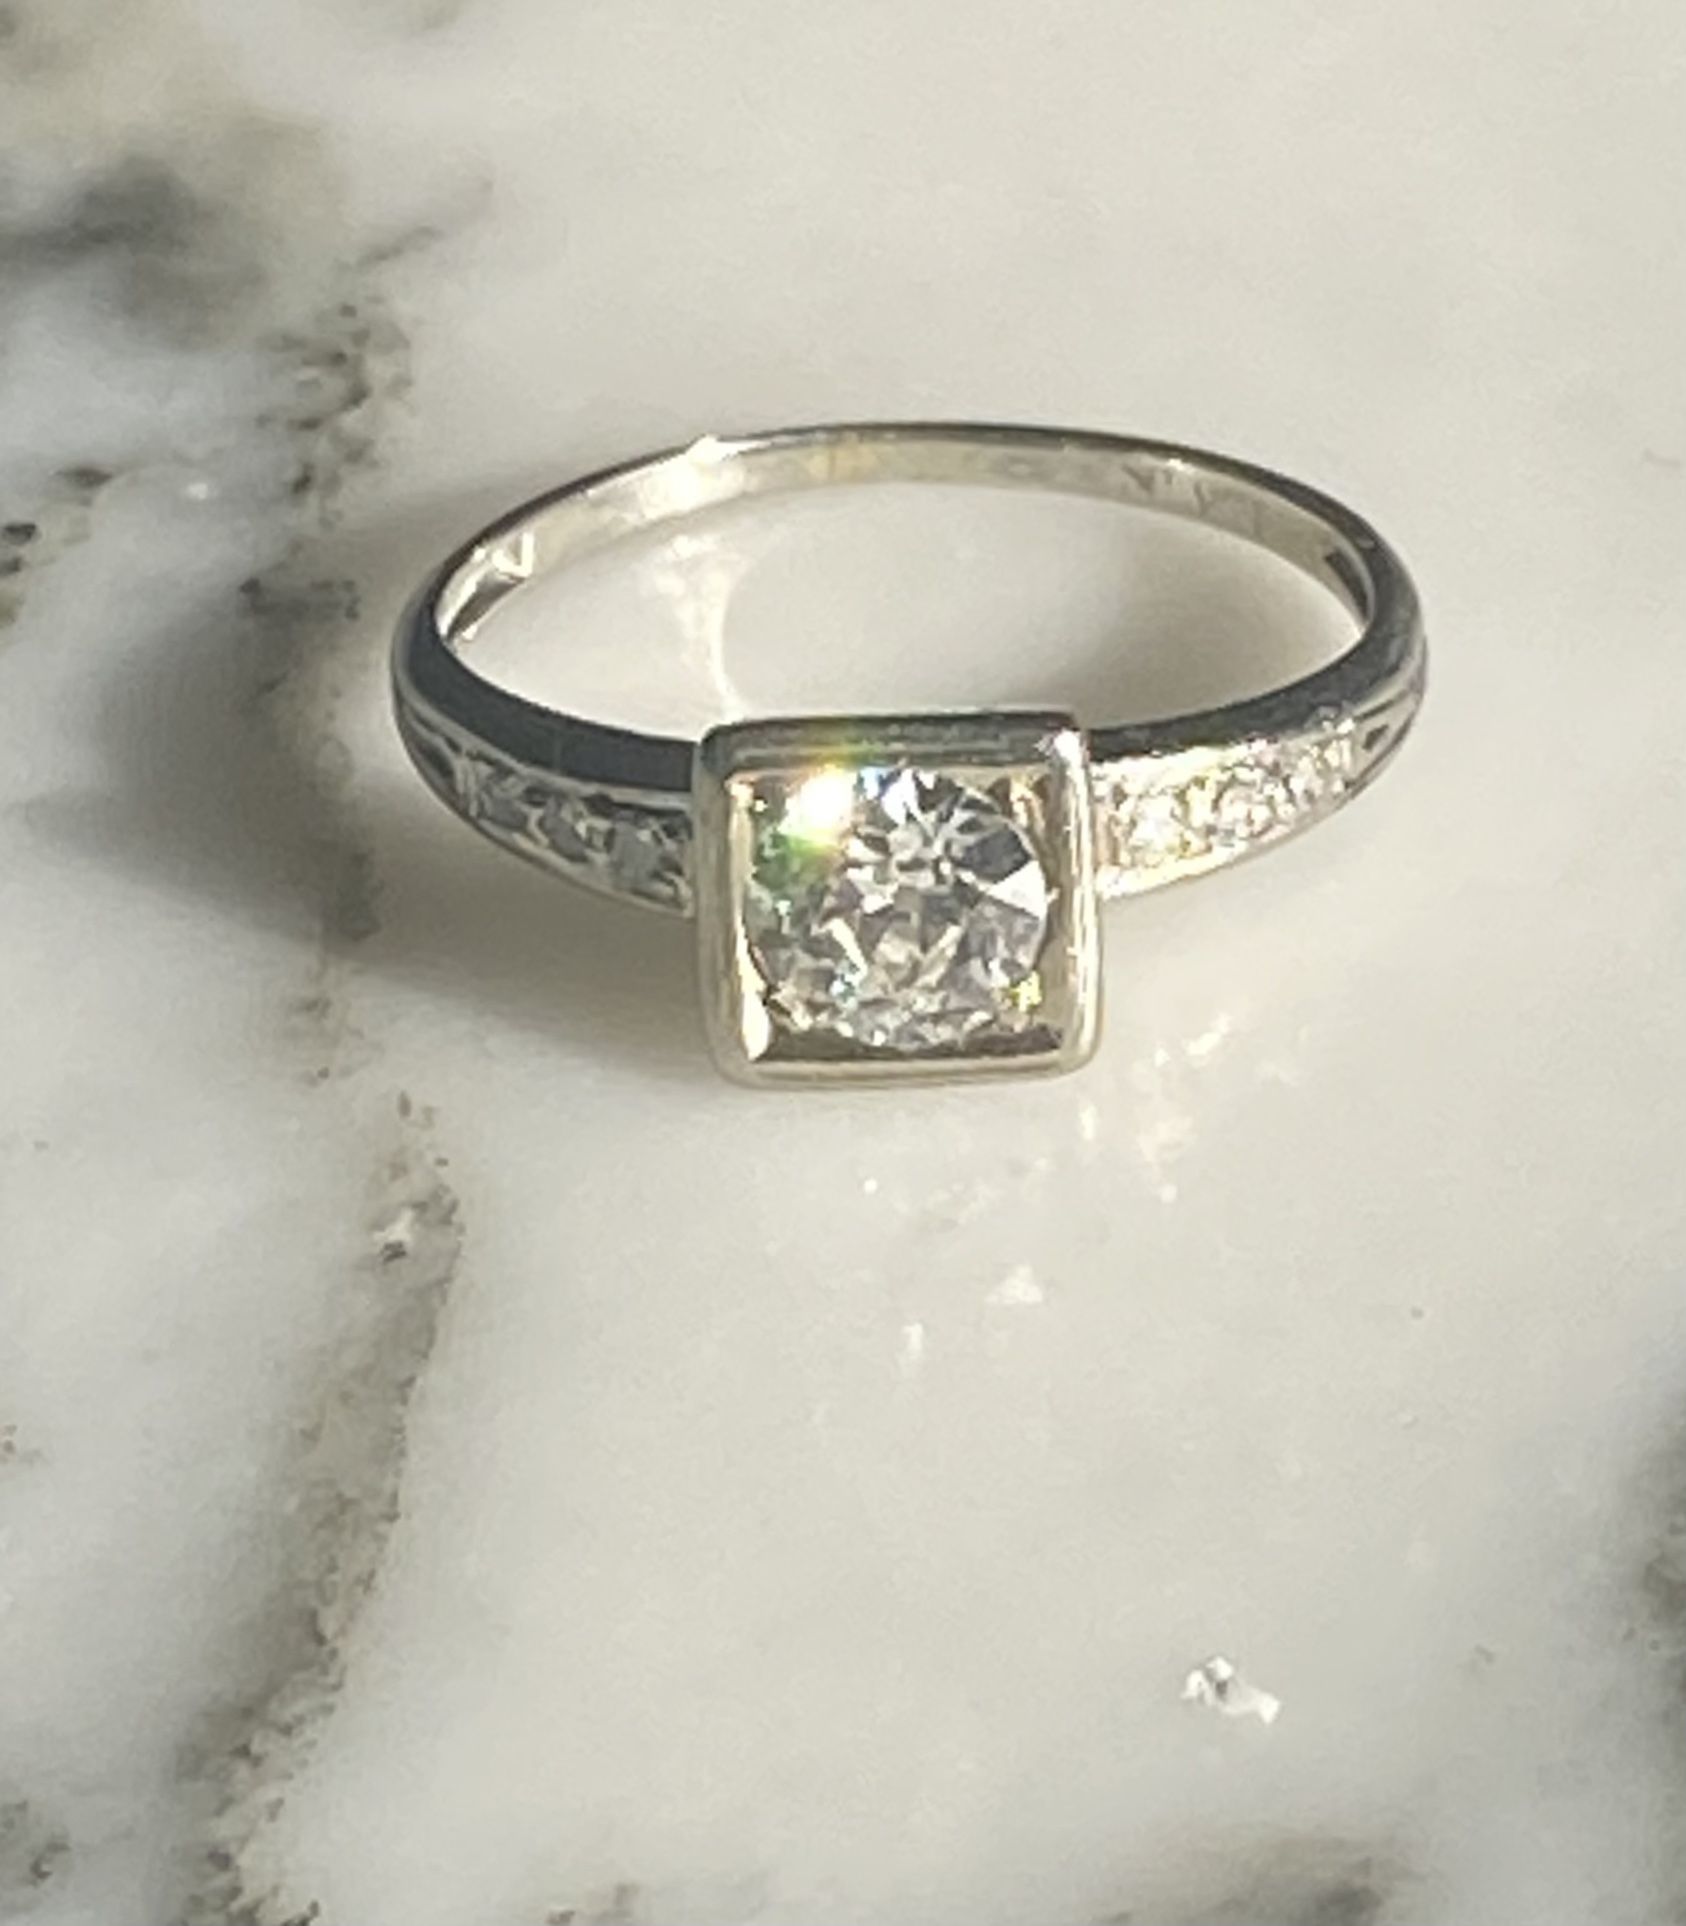 Vintage Diamond Ring .53ct With 6 Accent Diamonds 18k White Gold